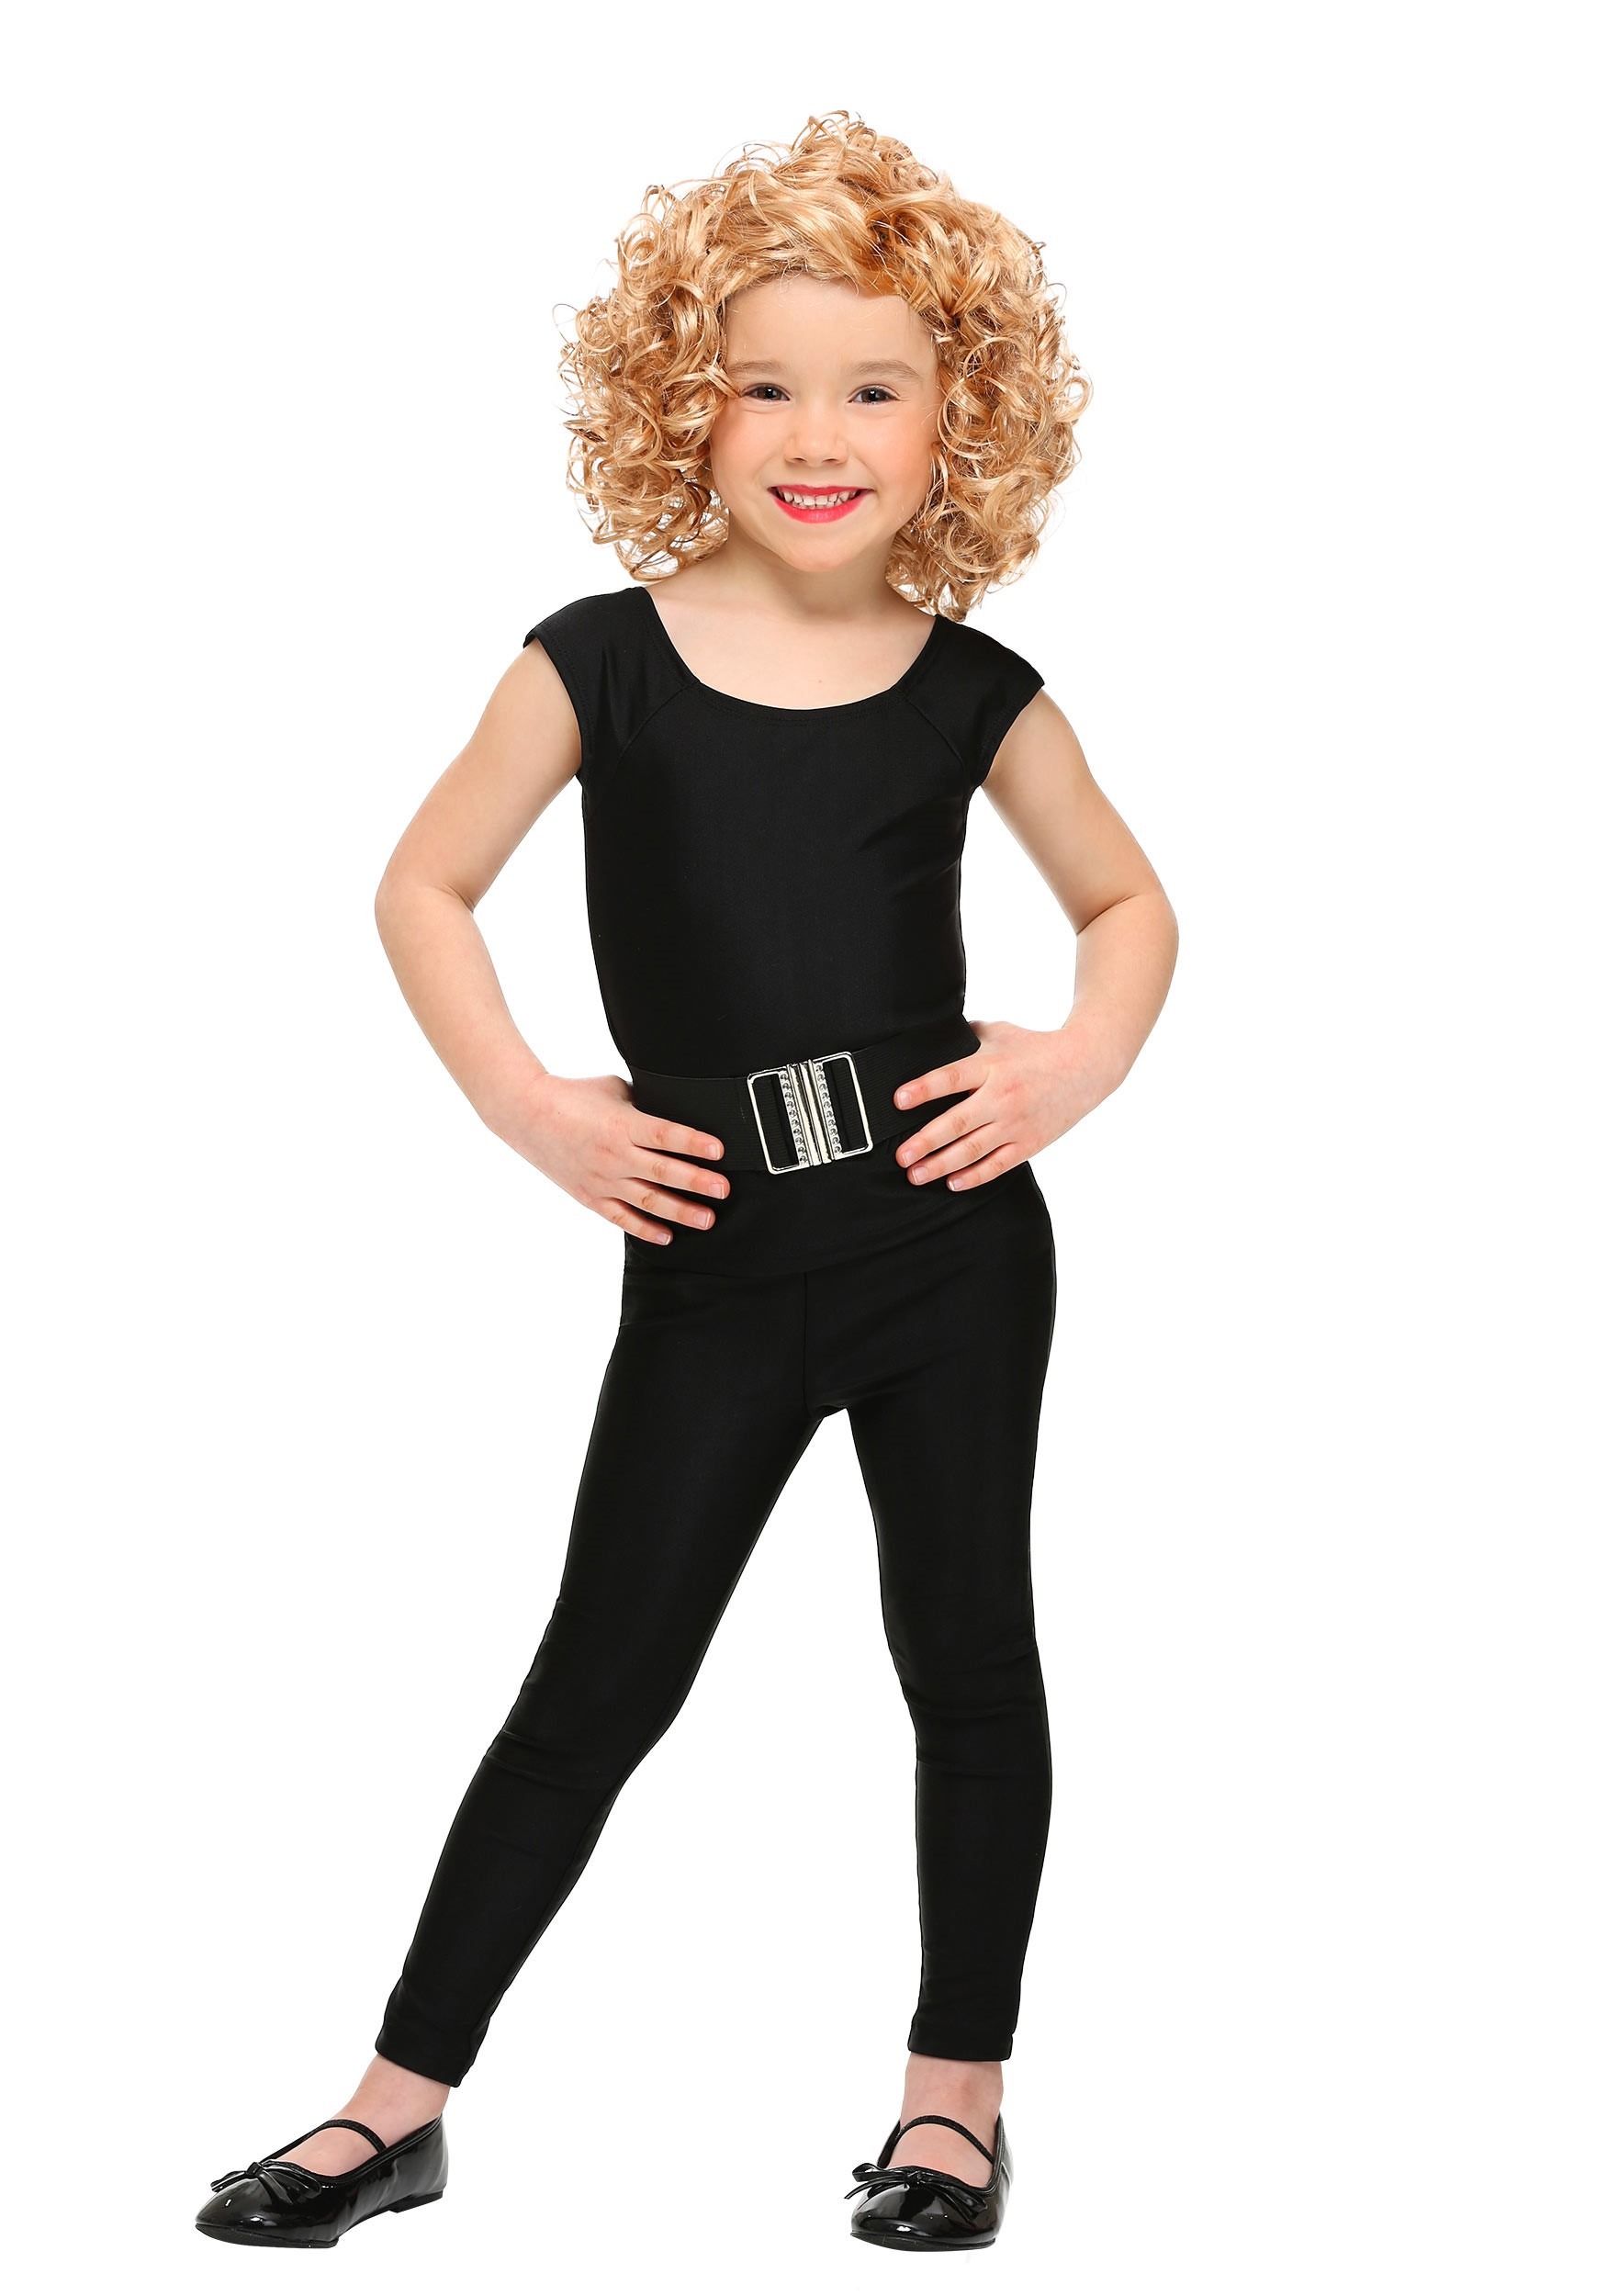 Toddler Grease Sandy Costume - image 1 of 3